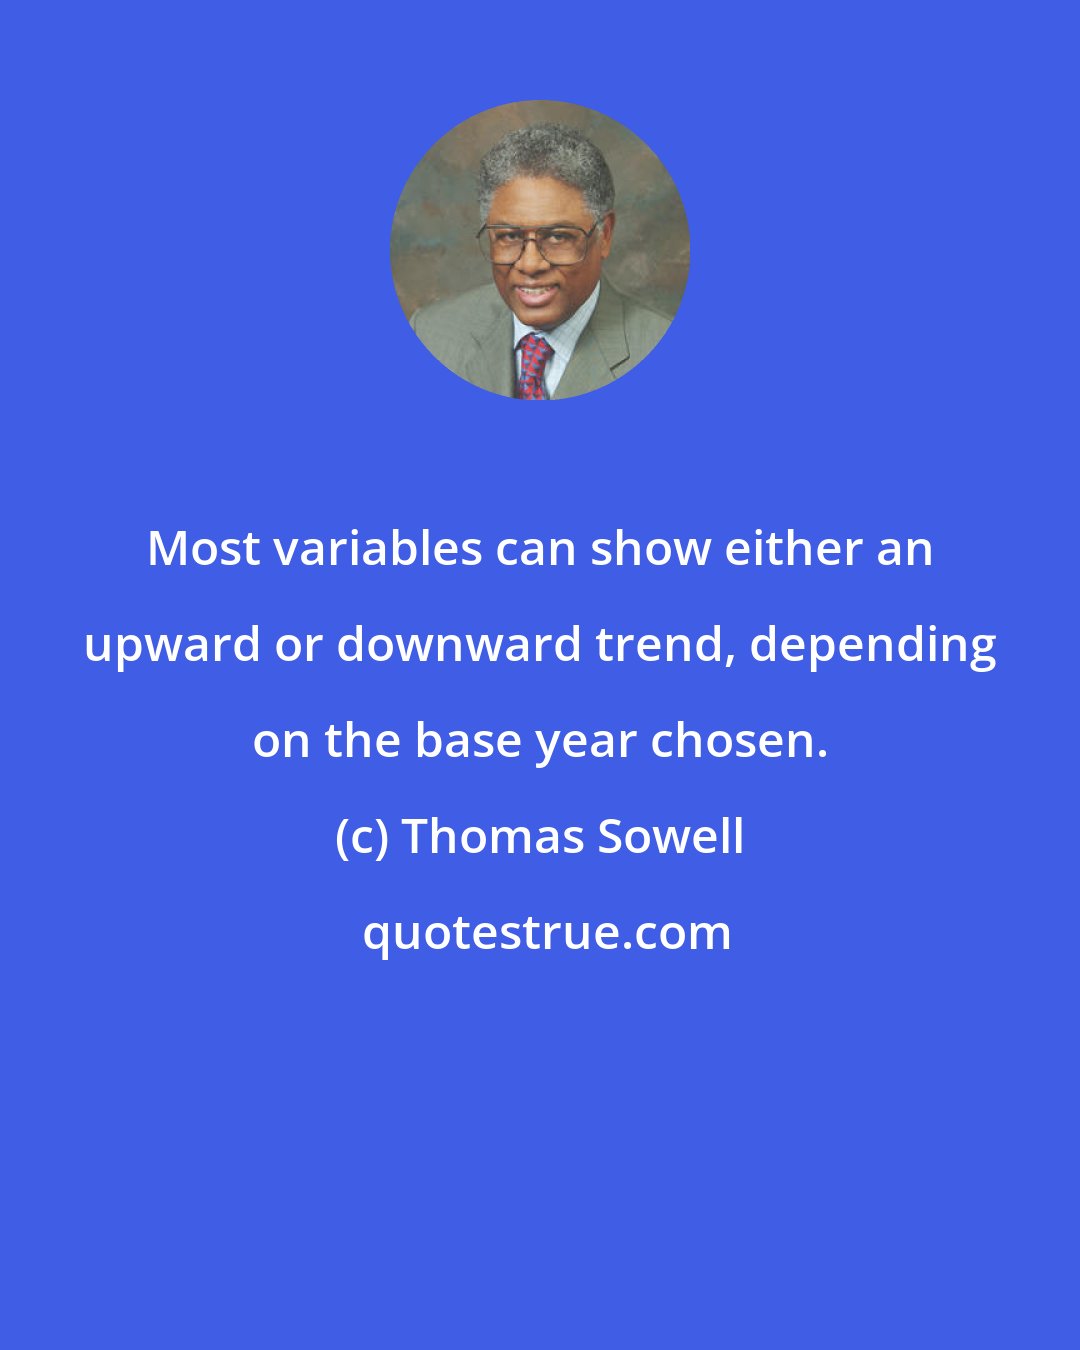 Thomas Sowell: Most variables can show either an upward or downward trend, depending on the base year chosen.